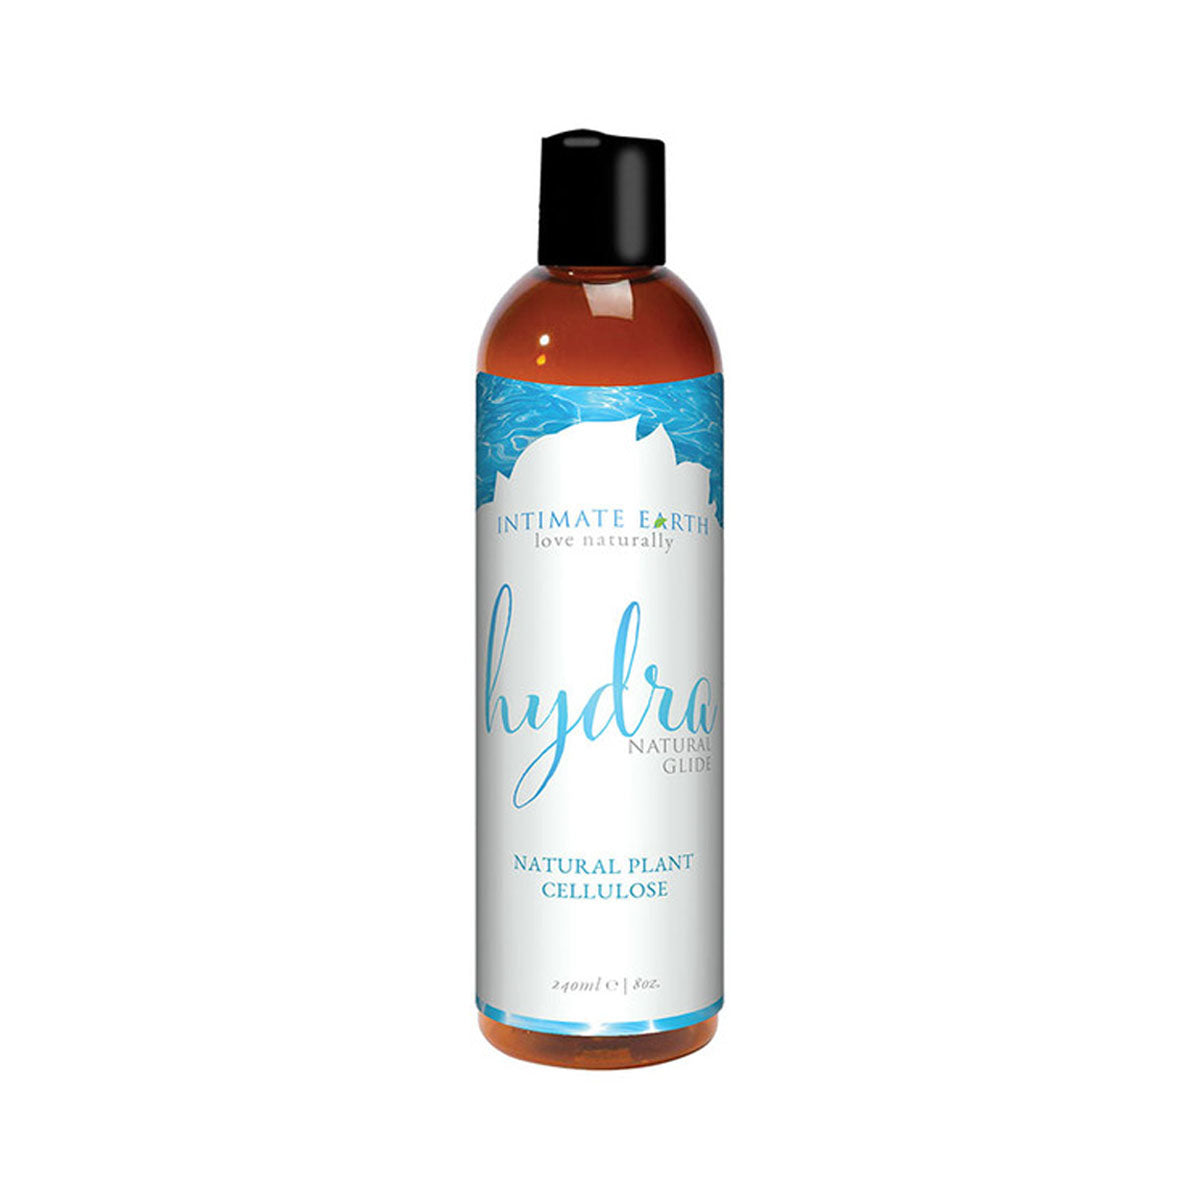 Intimate Earth Hydra Natural Water-Based Lube Nudie Co